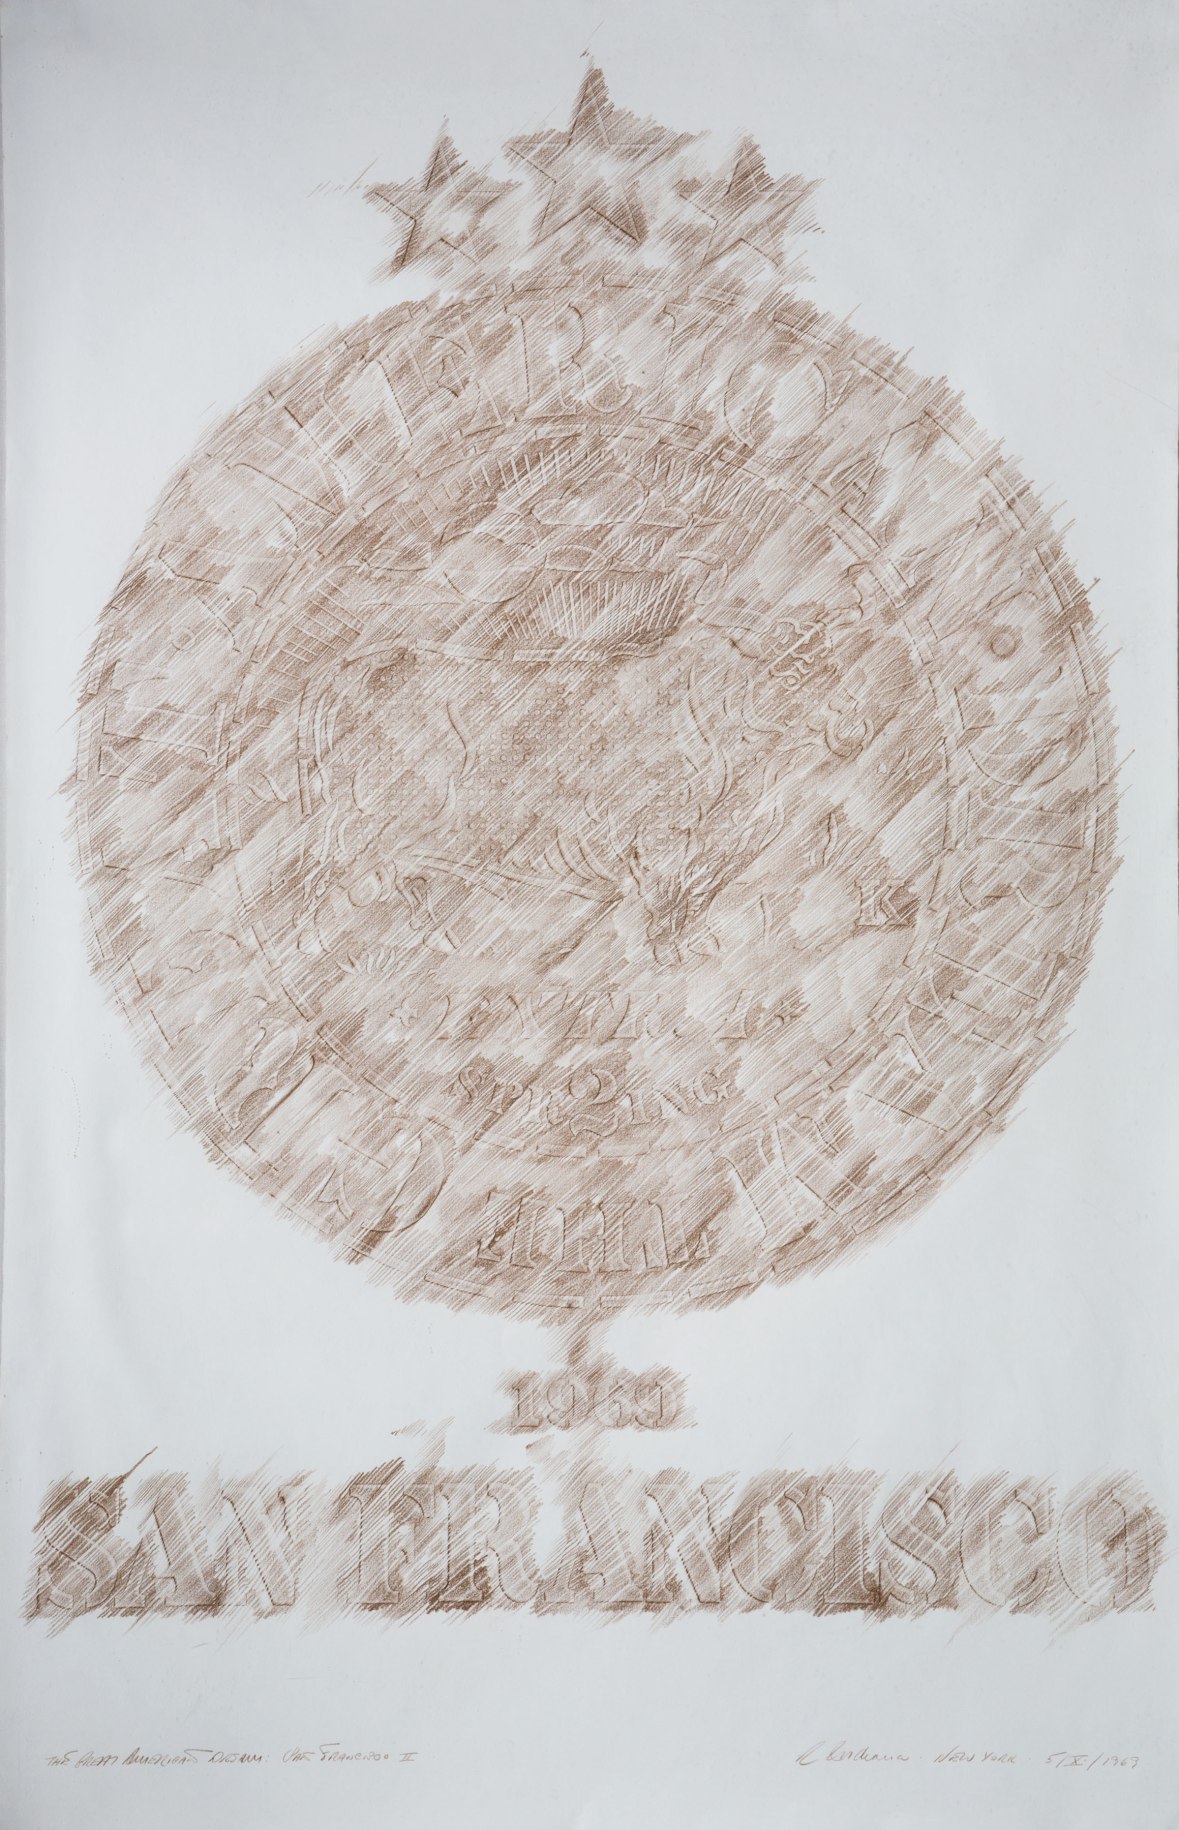 A 40 by 26 inch conte crayon on paper rubbing. A circle with the text The Great American Dream in the outer ring contains an image of a steer. Above the circle are three stars, and below the circle the year 1969 and San Francisco.